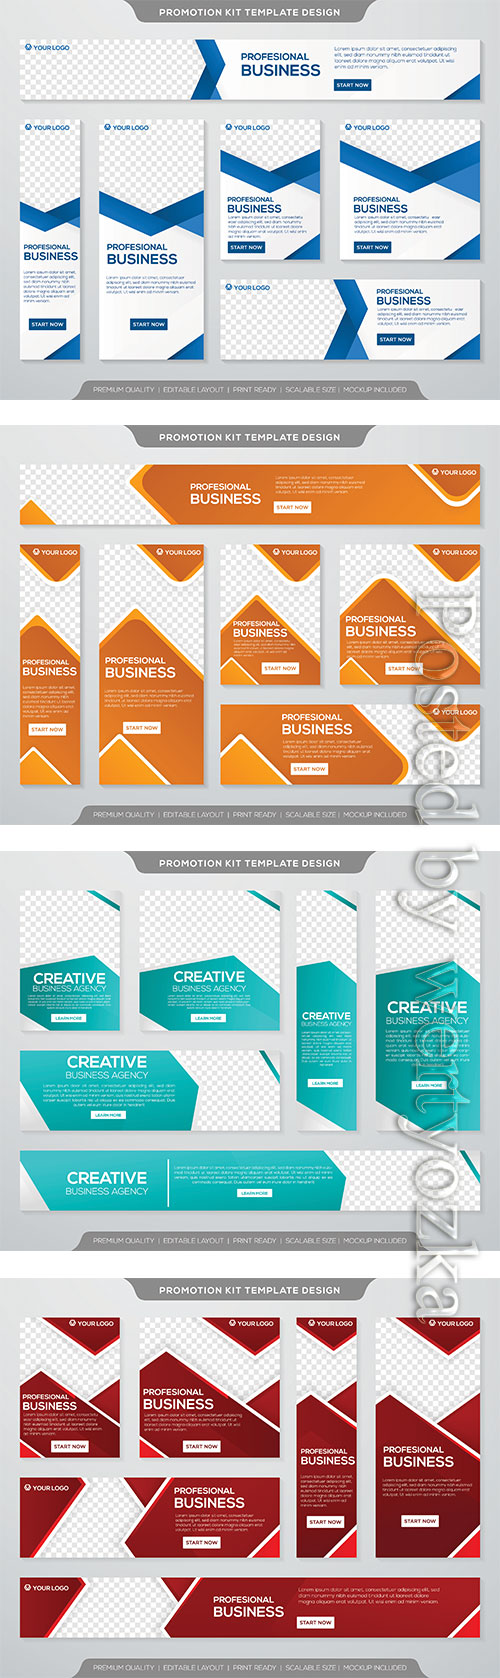 Business promotion kit template with simple layout